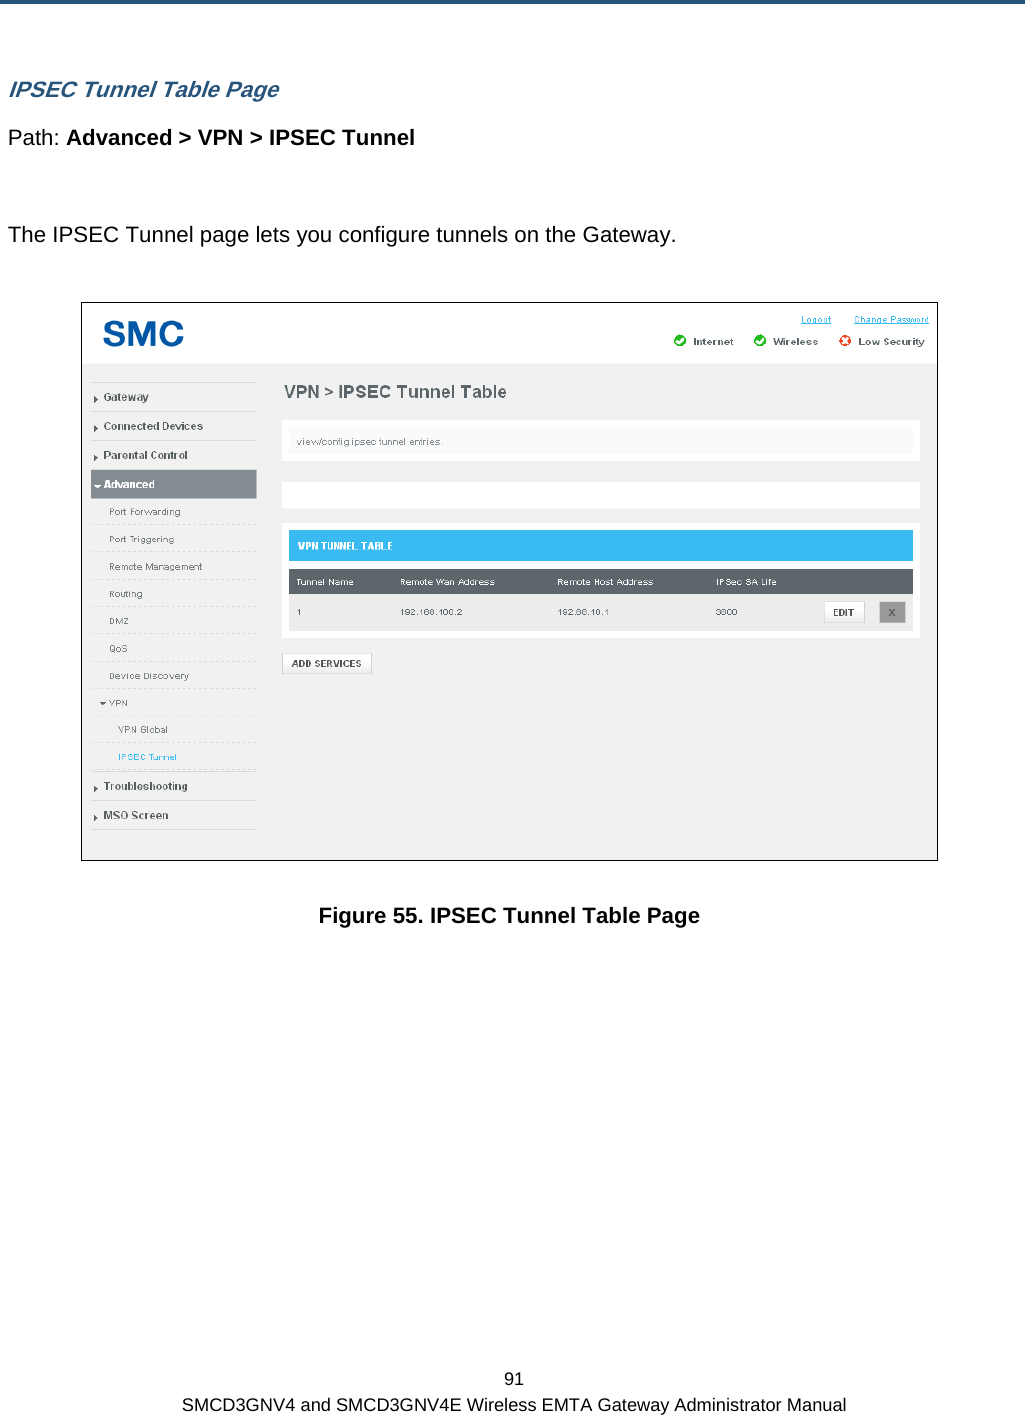  91 SMCD3GNV4 and SMCD3GNV4E Wireless EMTA Gateway Administrator Manual IPSEC Tunnel Table Page Path: Advanced &gt; VPN &gt; IPSEC Tunnel  The IPSEC Tunnel page lets you configure tunnels on the Gateway.  Figure 55. IPSEC Tunnel Table Page 